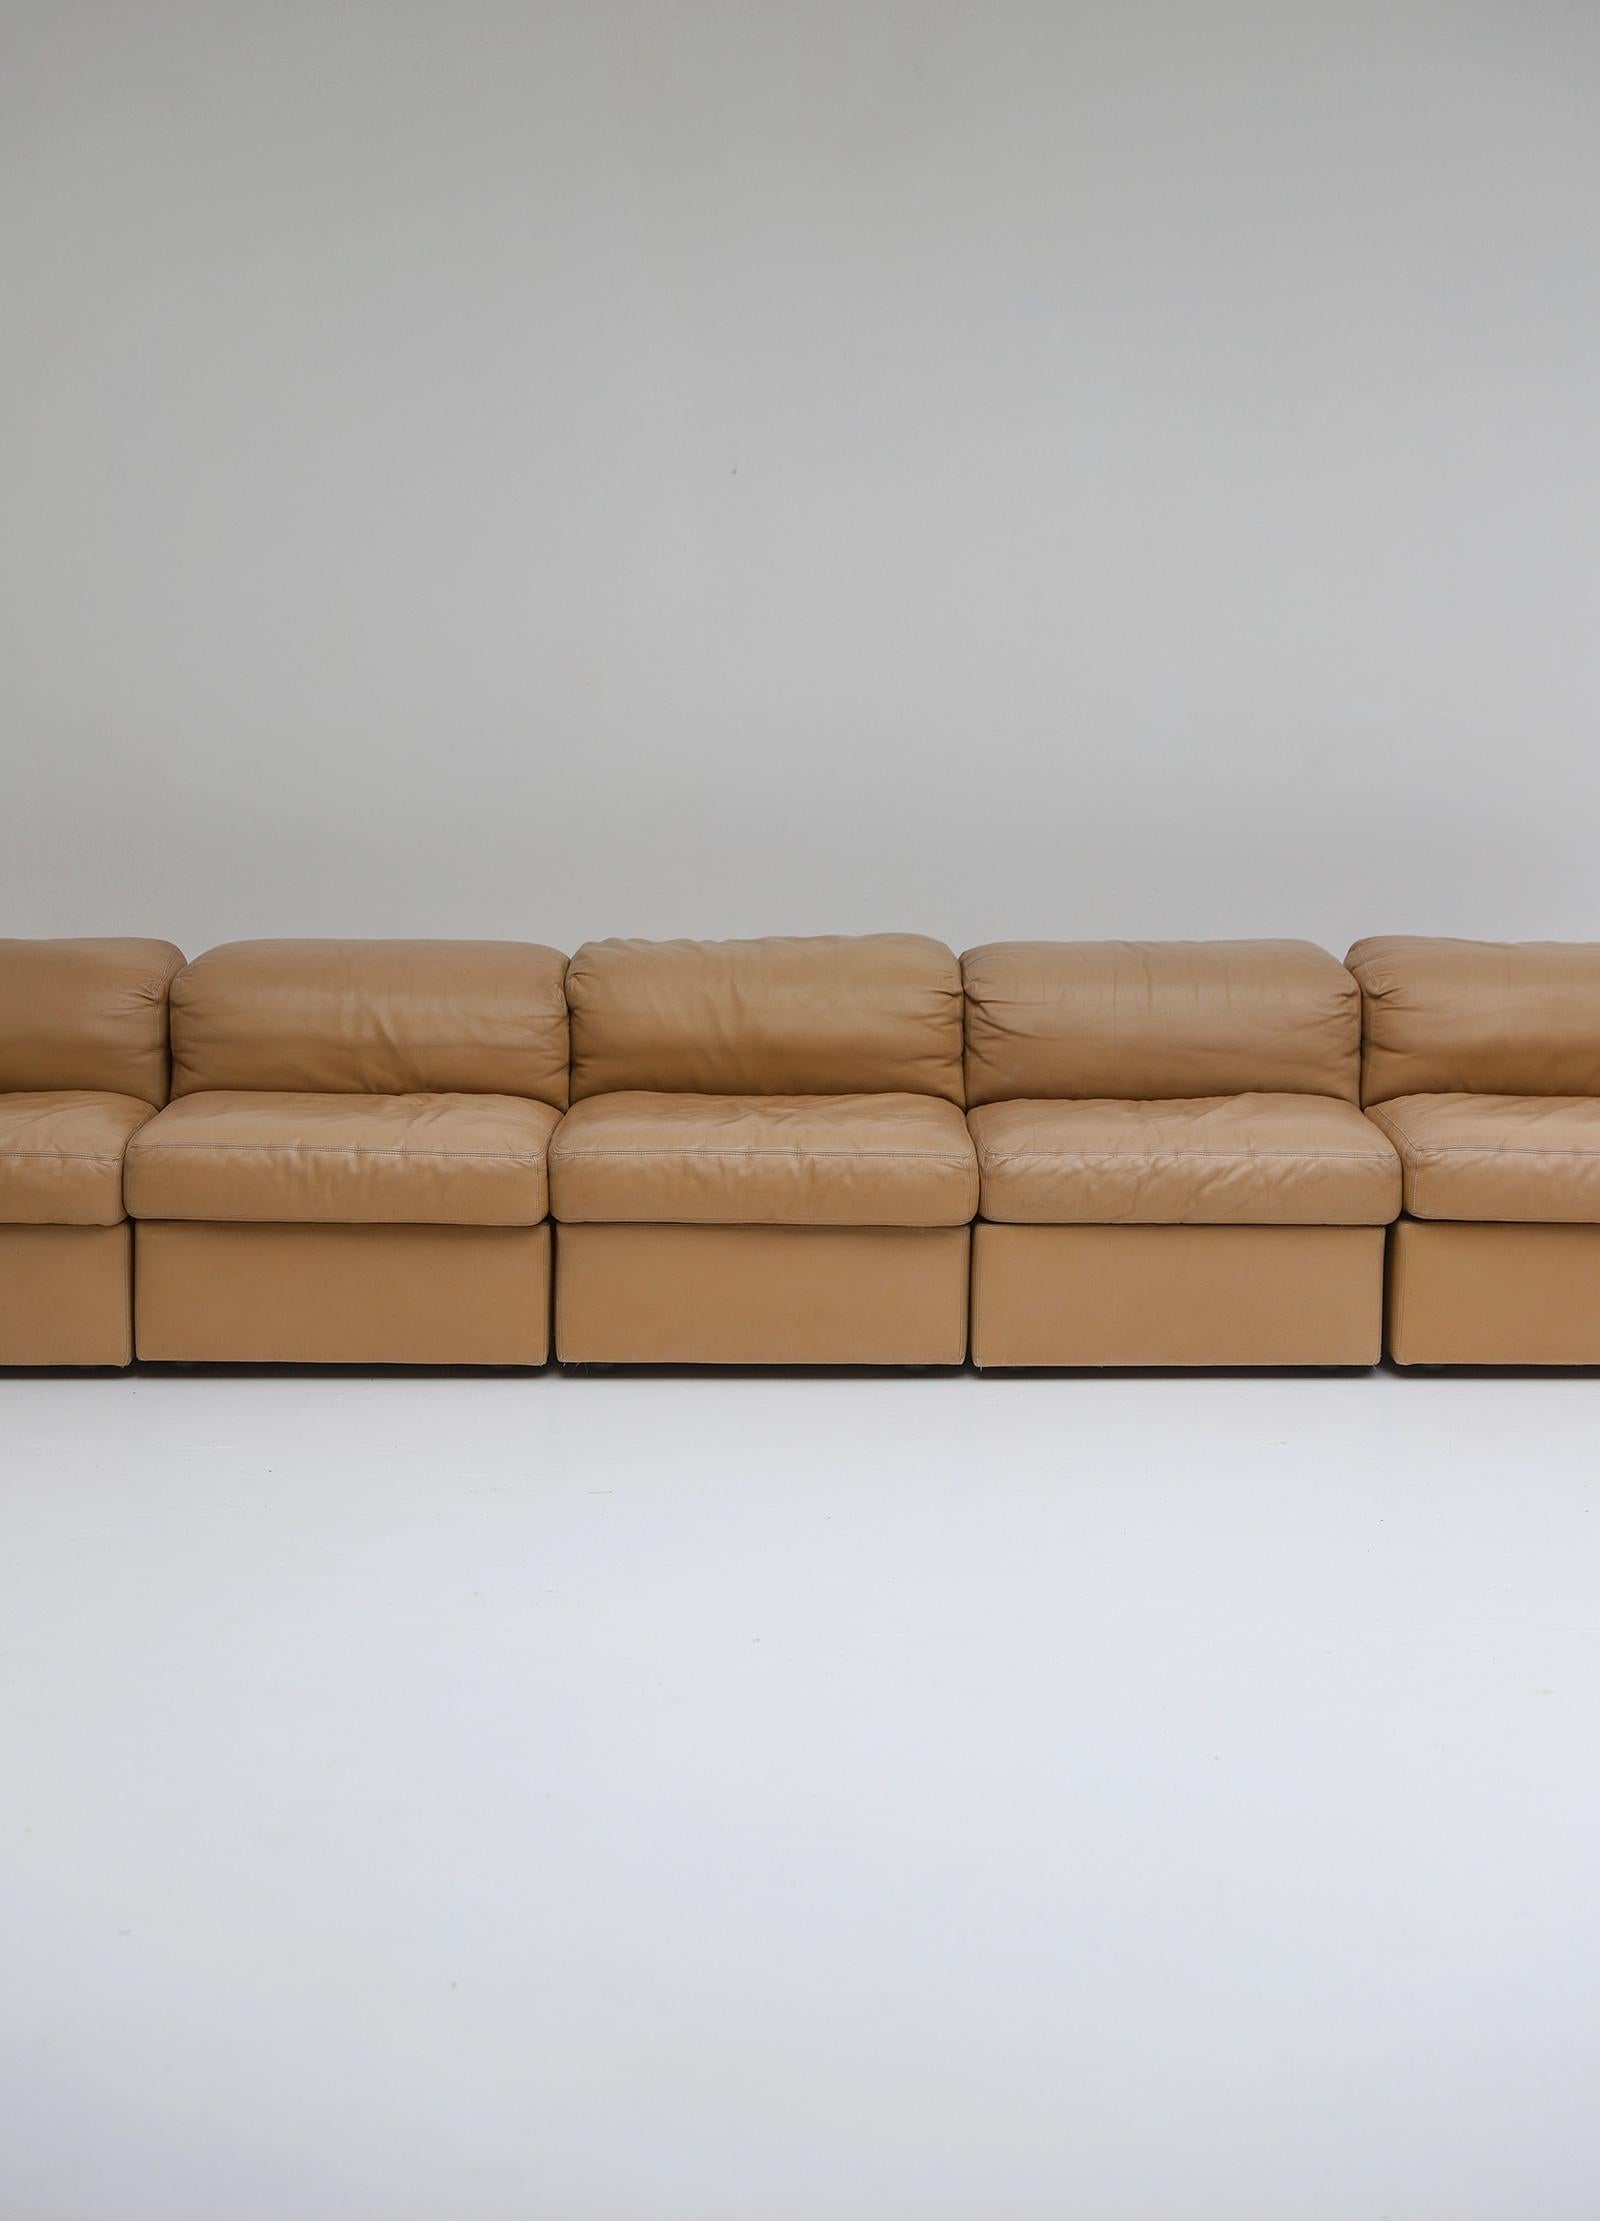 Beautiful modular jeep sofa, manufactured by Durlet, Belgium, 1970s. The sofa consists of five seating elements and is made in a quality leather. The elements can be attached to each other with metal chrome hooks that can be found underneath the